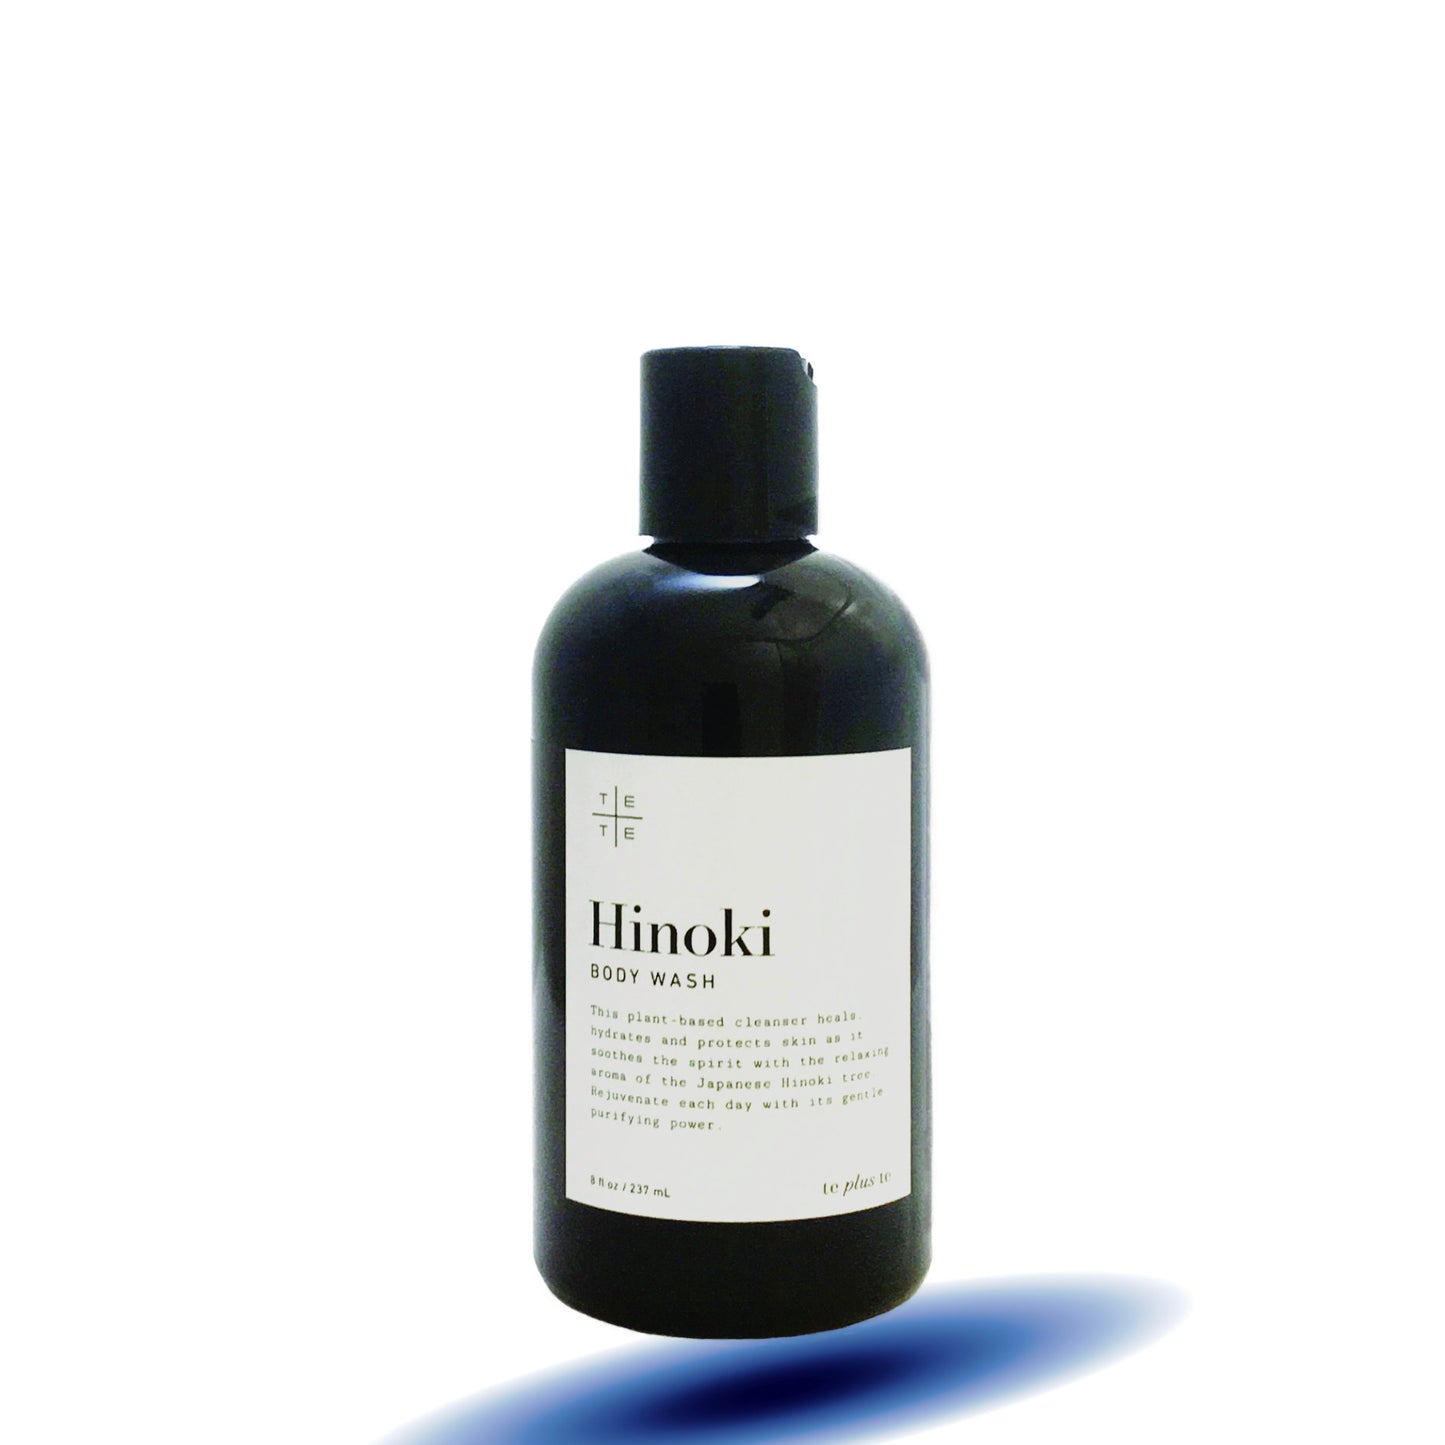 te plus te_Hinoki Body Wash 8 oz, organic plant-based cleanser heals, hydrates and protects skin as it soothes the spirit with the relaxing aroma of the Japanese hinoki tree.